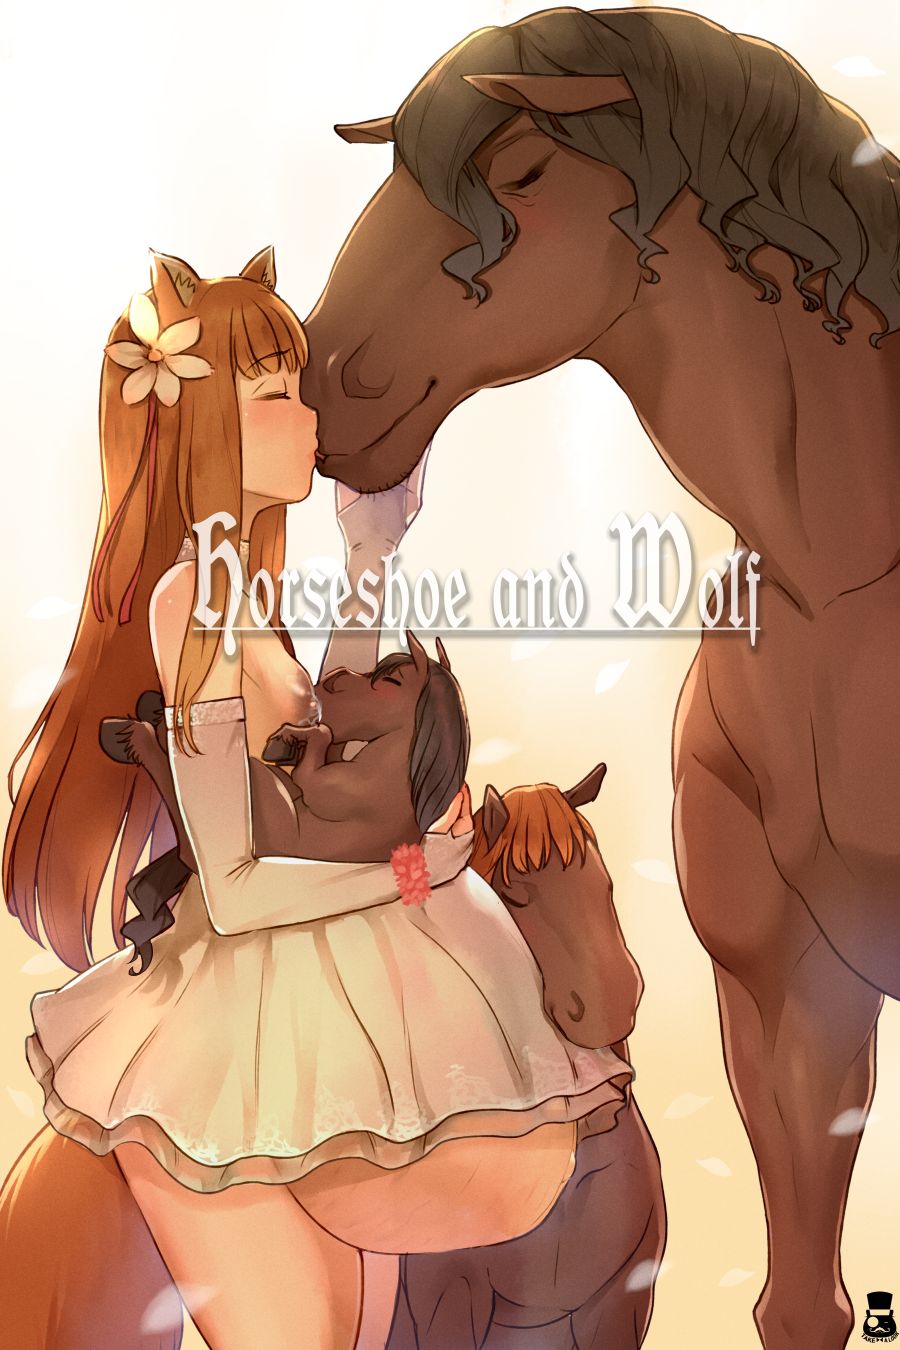 [Mr.takealook] Horseshoe and Wolf (狼と香辛料) [英語]